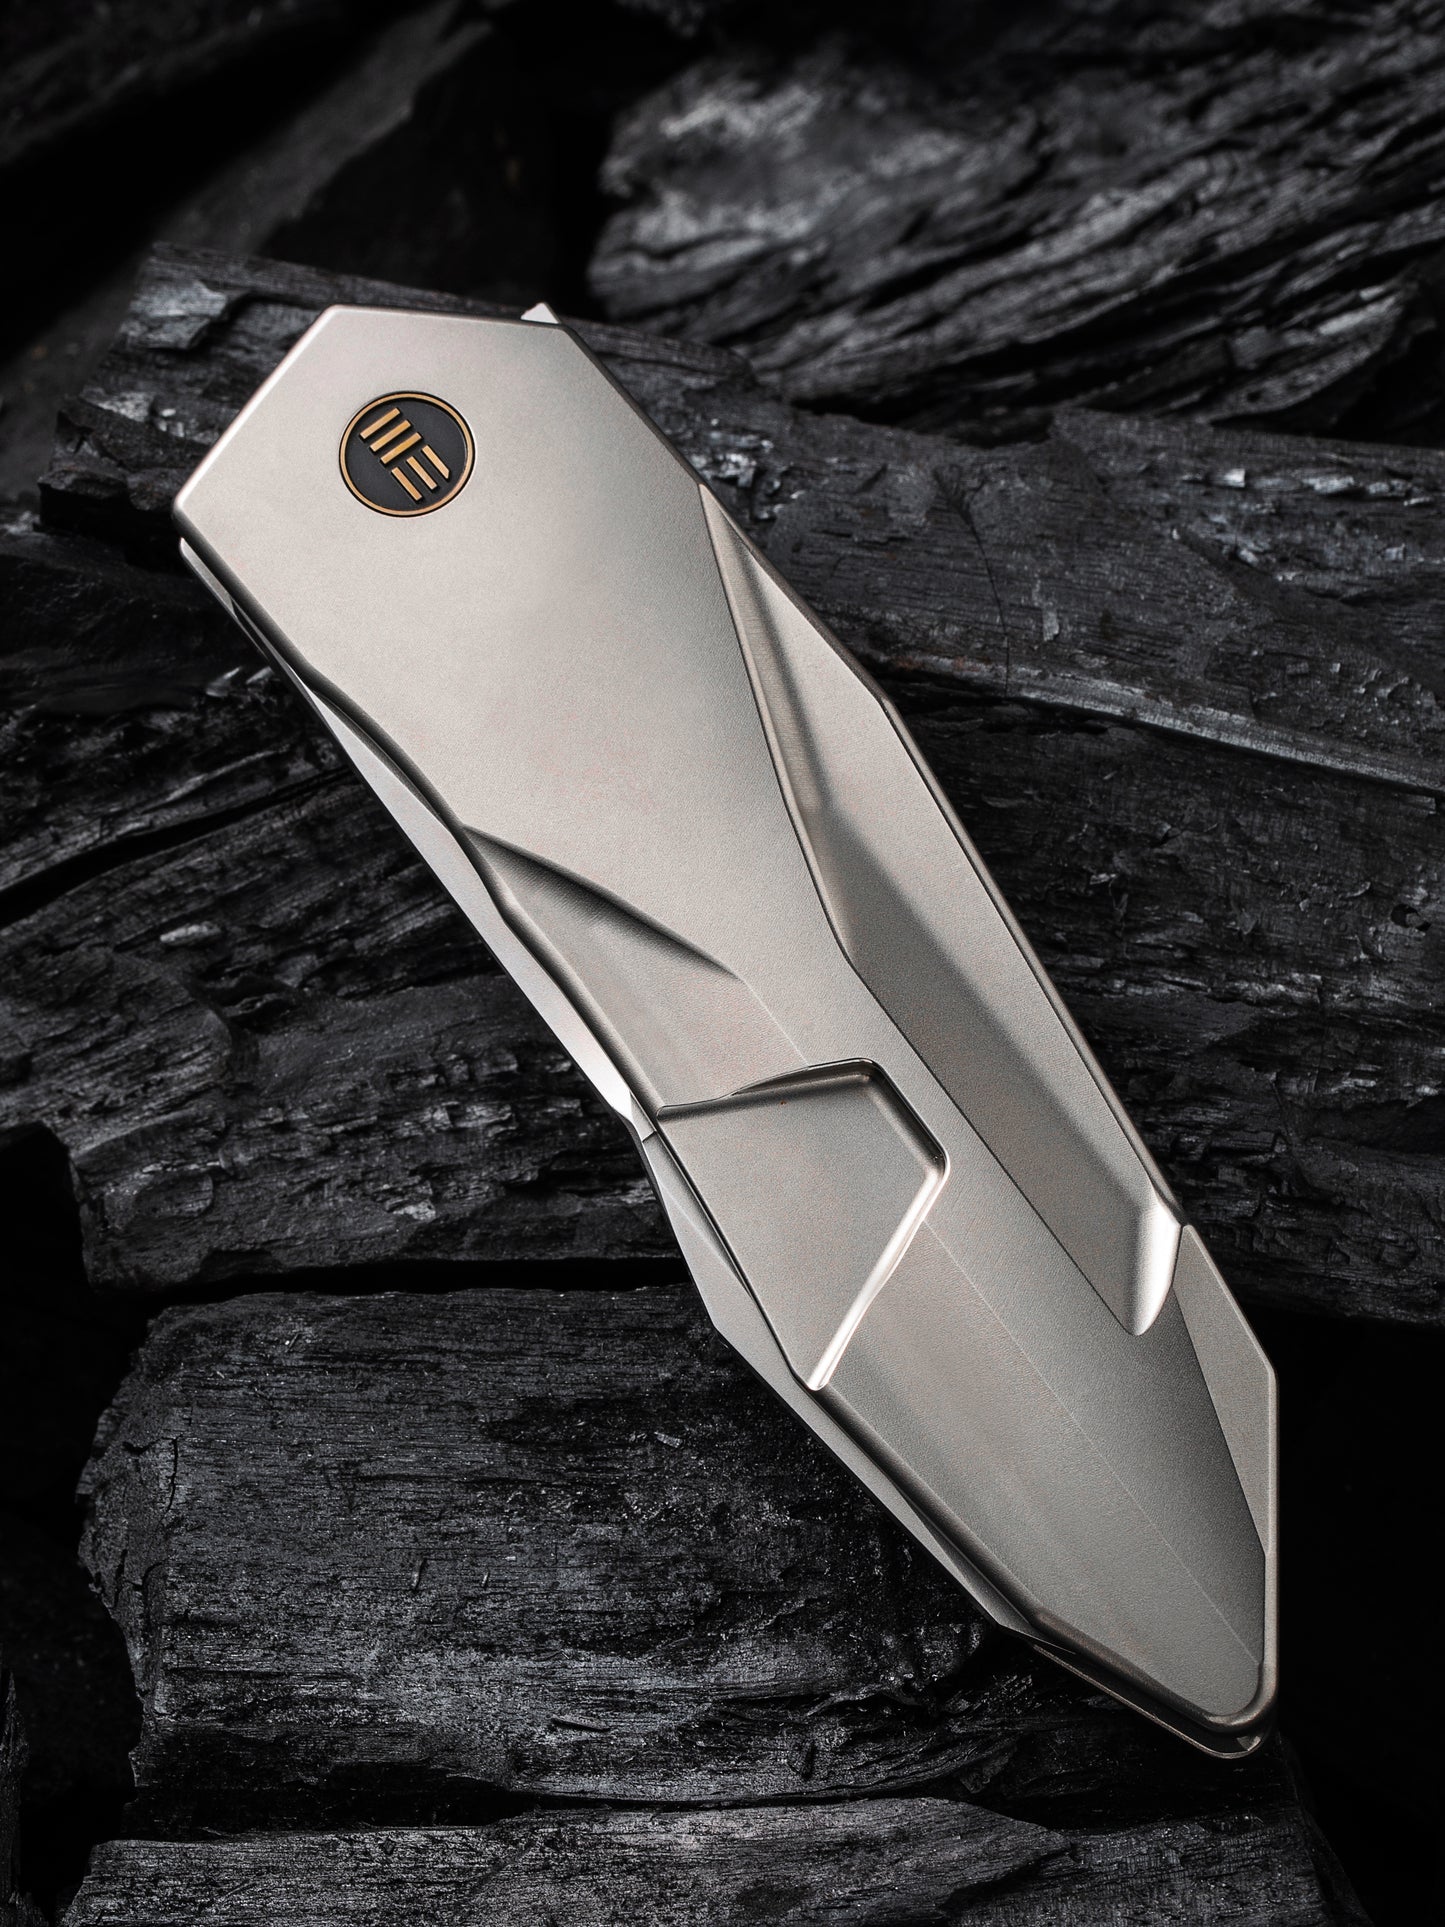 WE Solid 3.88" CPM 20CV Polished Bead Blasted Titanium Folding Knife by GTC WE22028-2